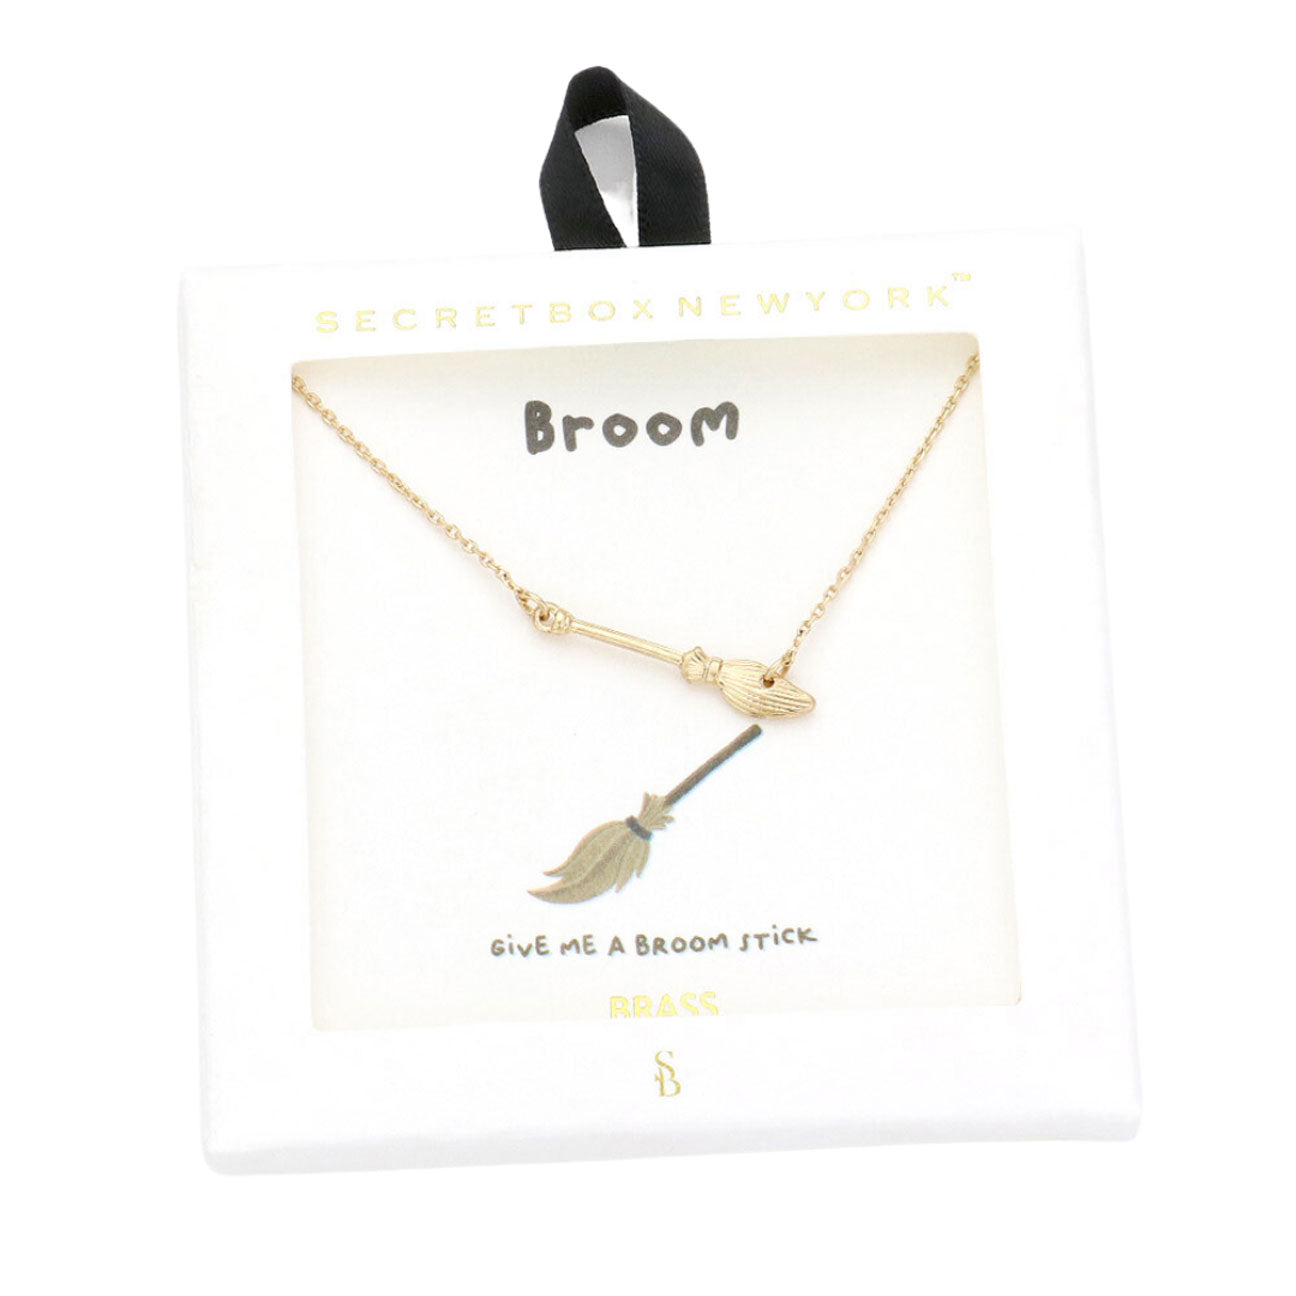 Secret Box Brass Metal Broom Pendant Necklace. Take your love for statement accessorizing to a new level of affection with these Pendant Necklace! Highlight your appearance, and grasp everyone's eye at your party. Enhance your attire with these vibrant artisanal necklace to show off your fun trendsetting style. 